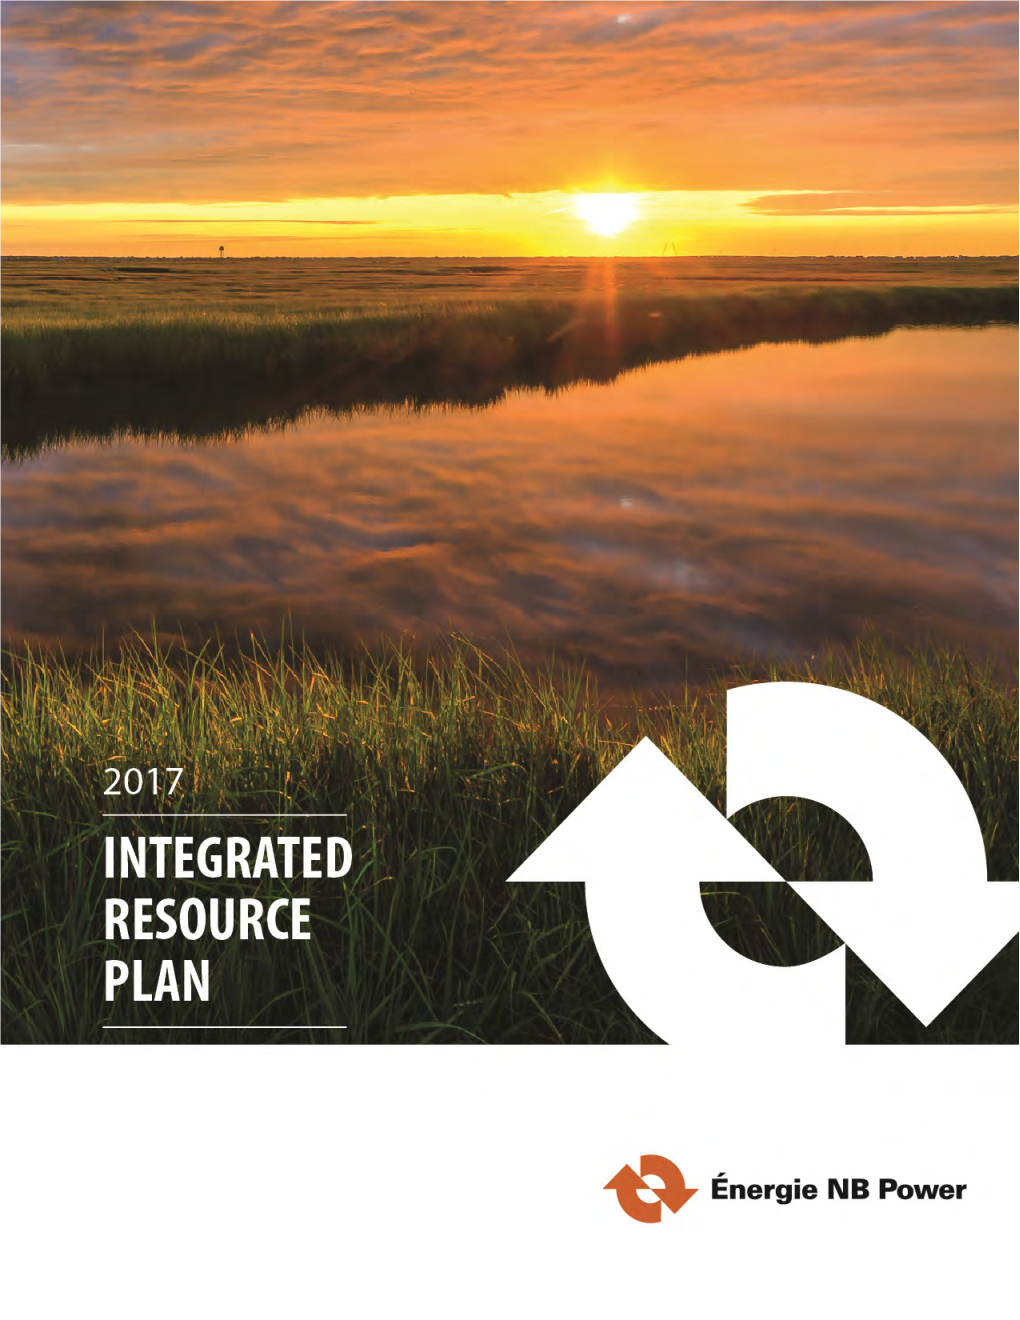 NB Power's 2017 Integrated Resource Plan